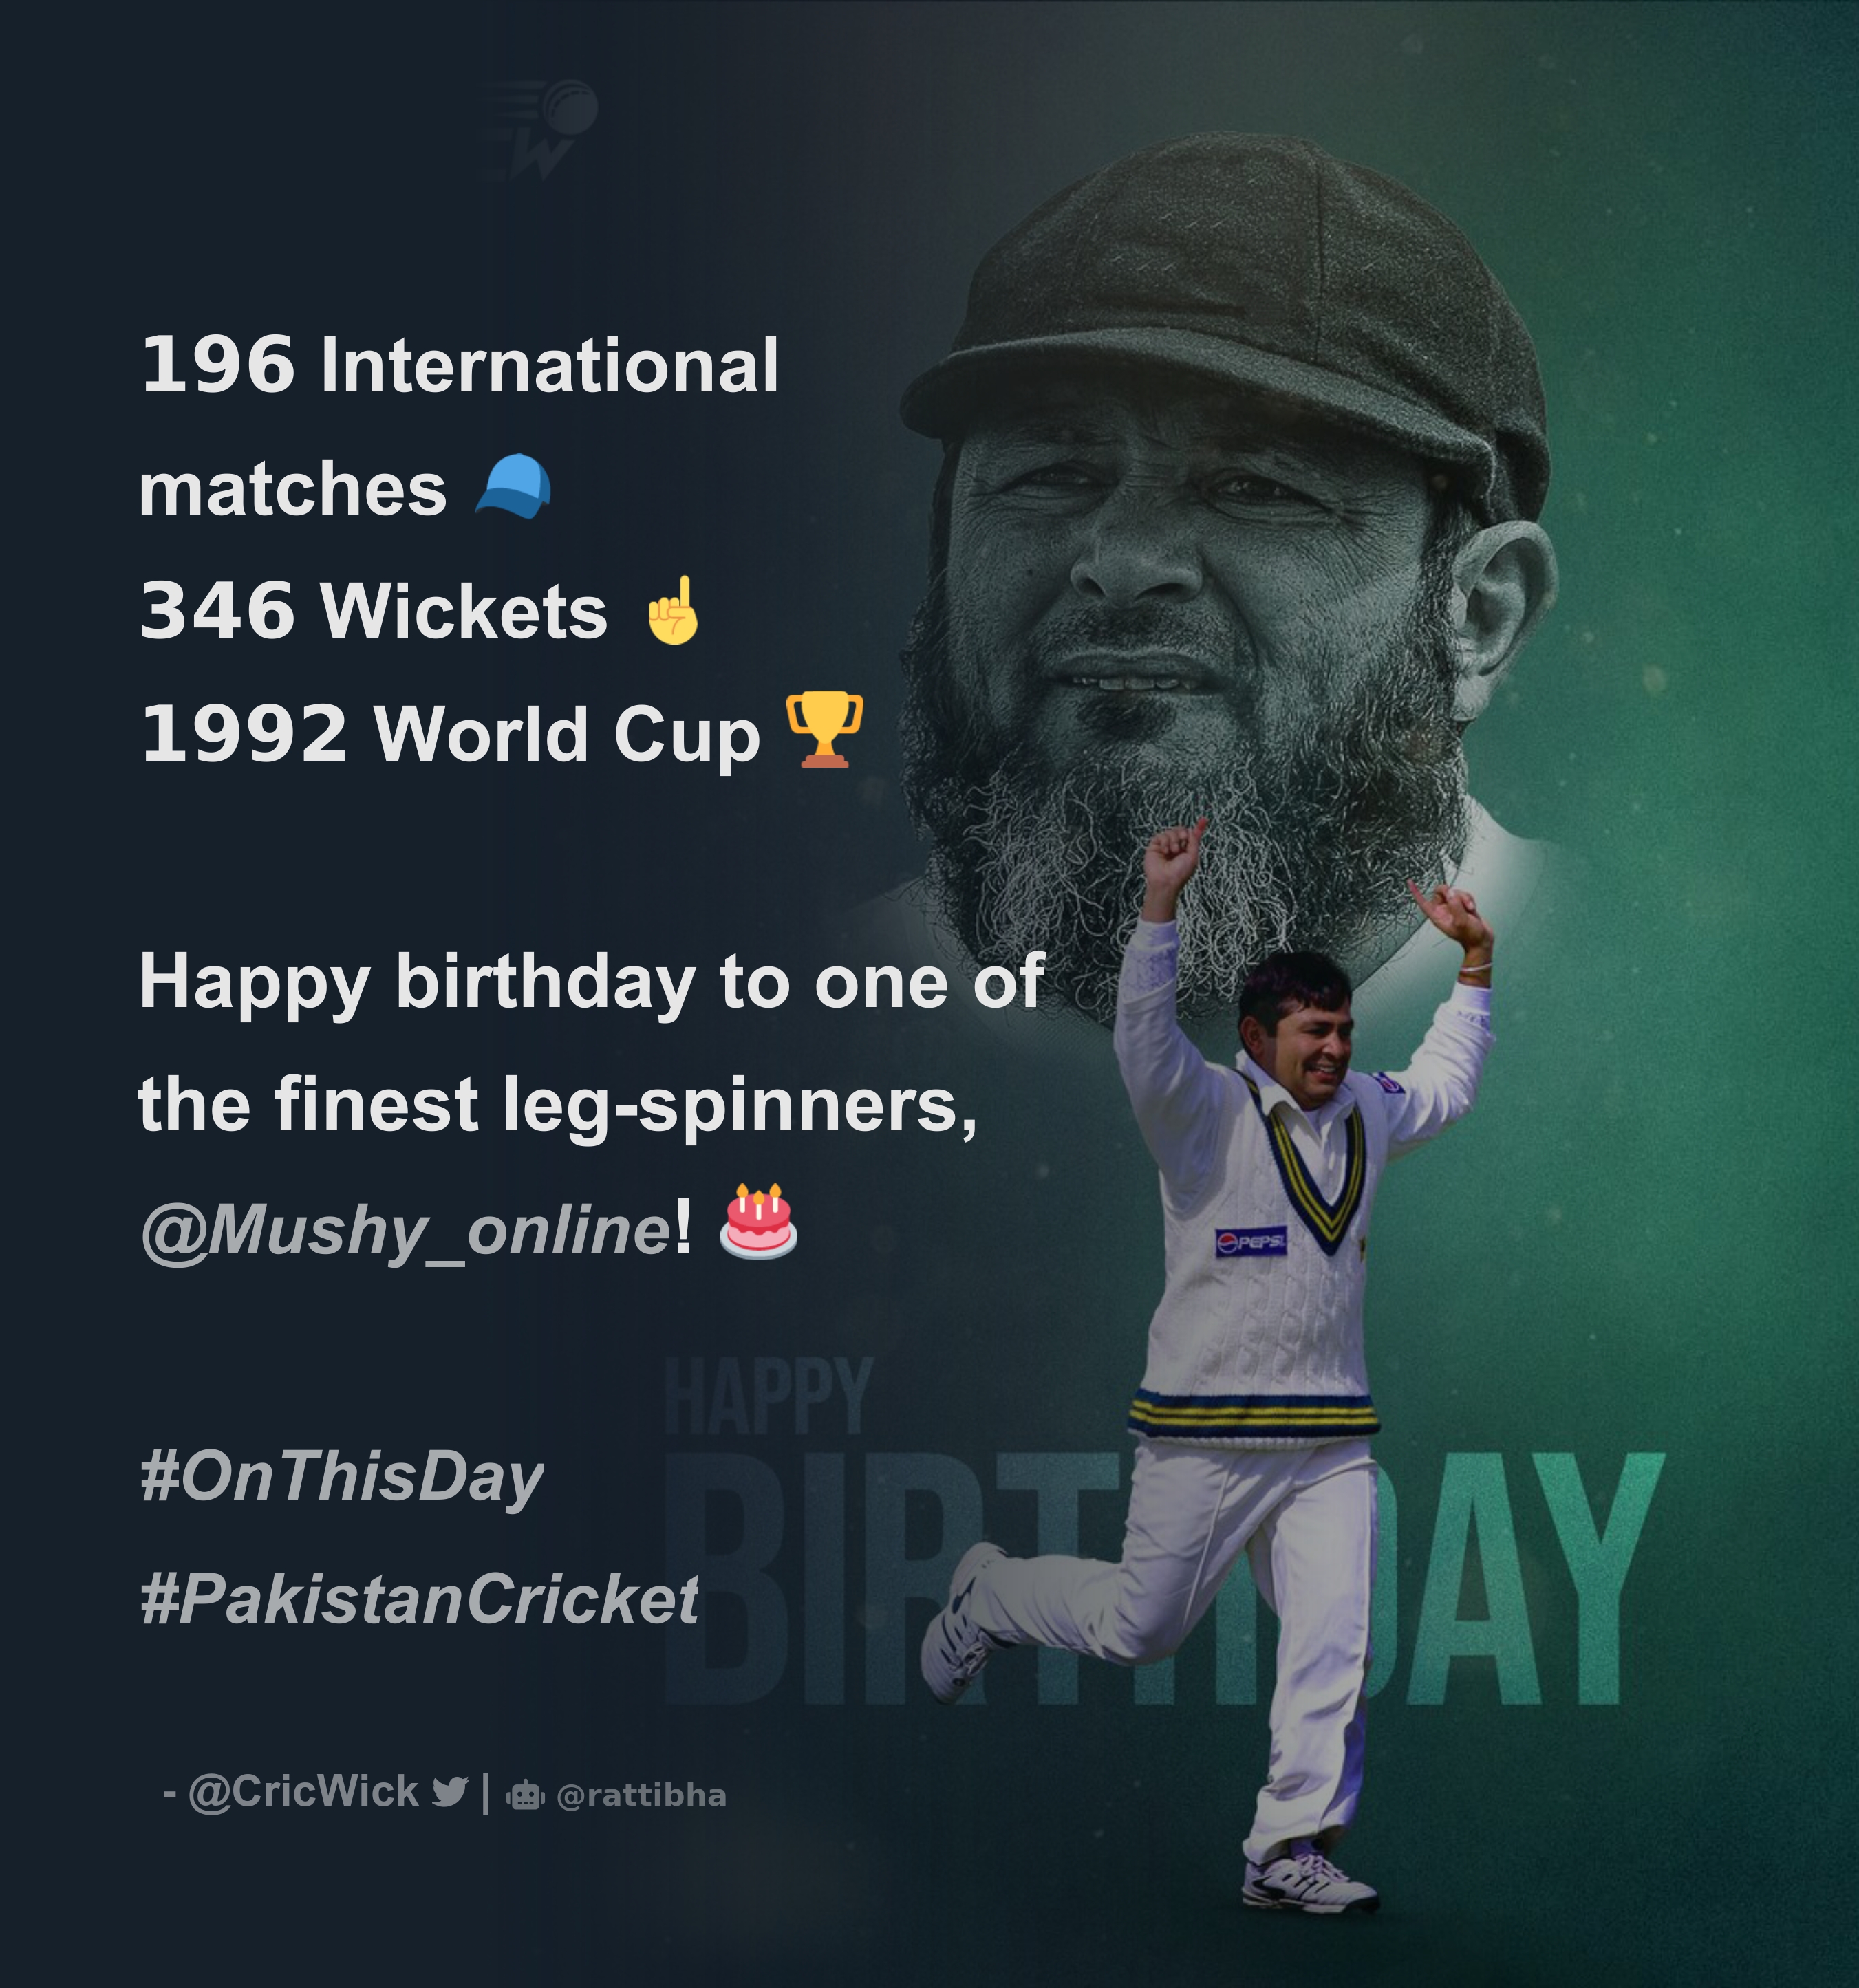 𝟭𝟵𝟲 International matches 🧢 𝟯𝟰𝟲 Wickets ☝️ 𝟭𝟵𝟵𝟮 World Cup 🏆 Happy birthday to one of the finest leg-spinners,Mushy_online! 🎂 #OnThisDay #Pak - Thread from CricWickCricWick